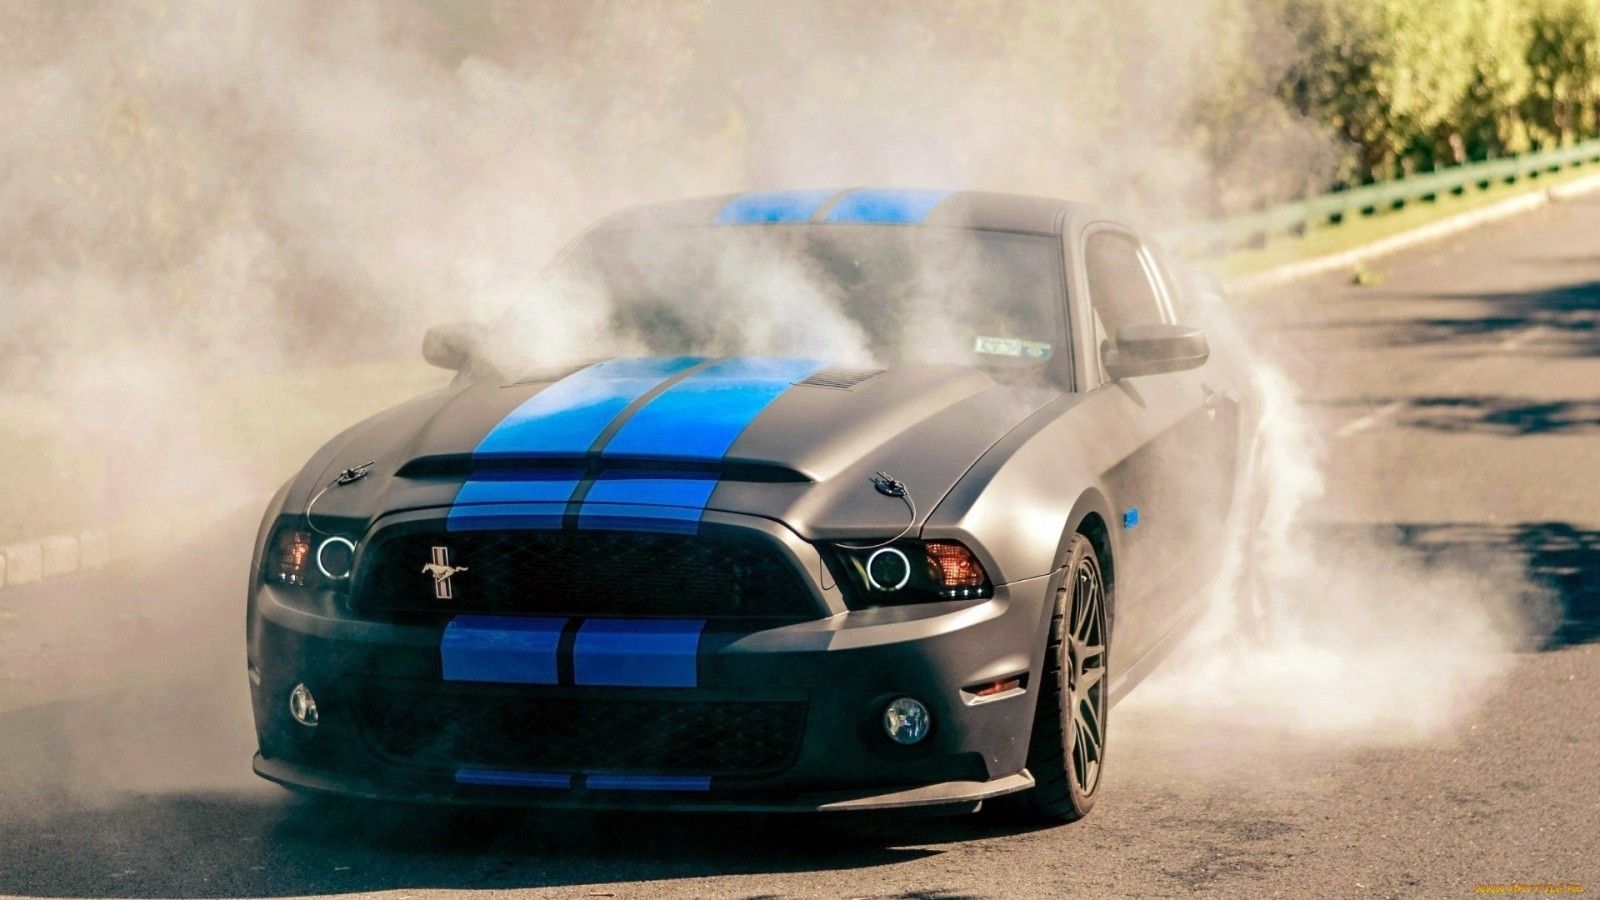 Download 1600x900 Ford Mustang Shelby Gt Burnout, Front View